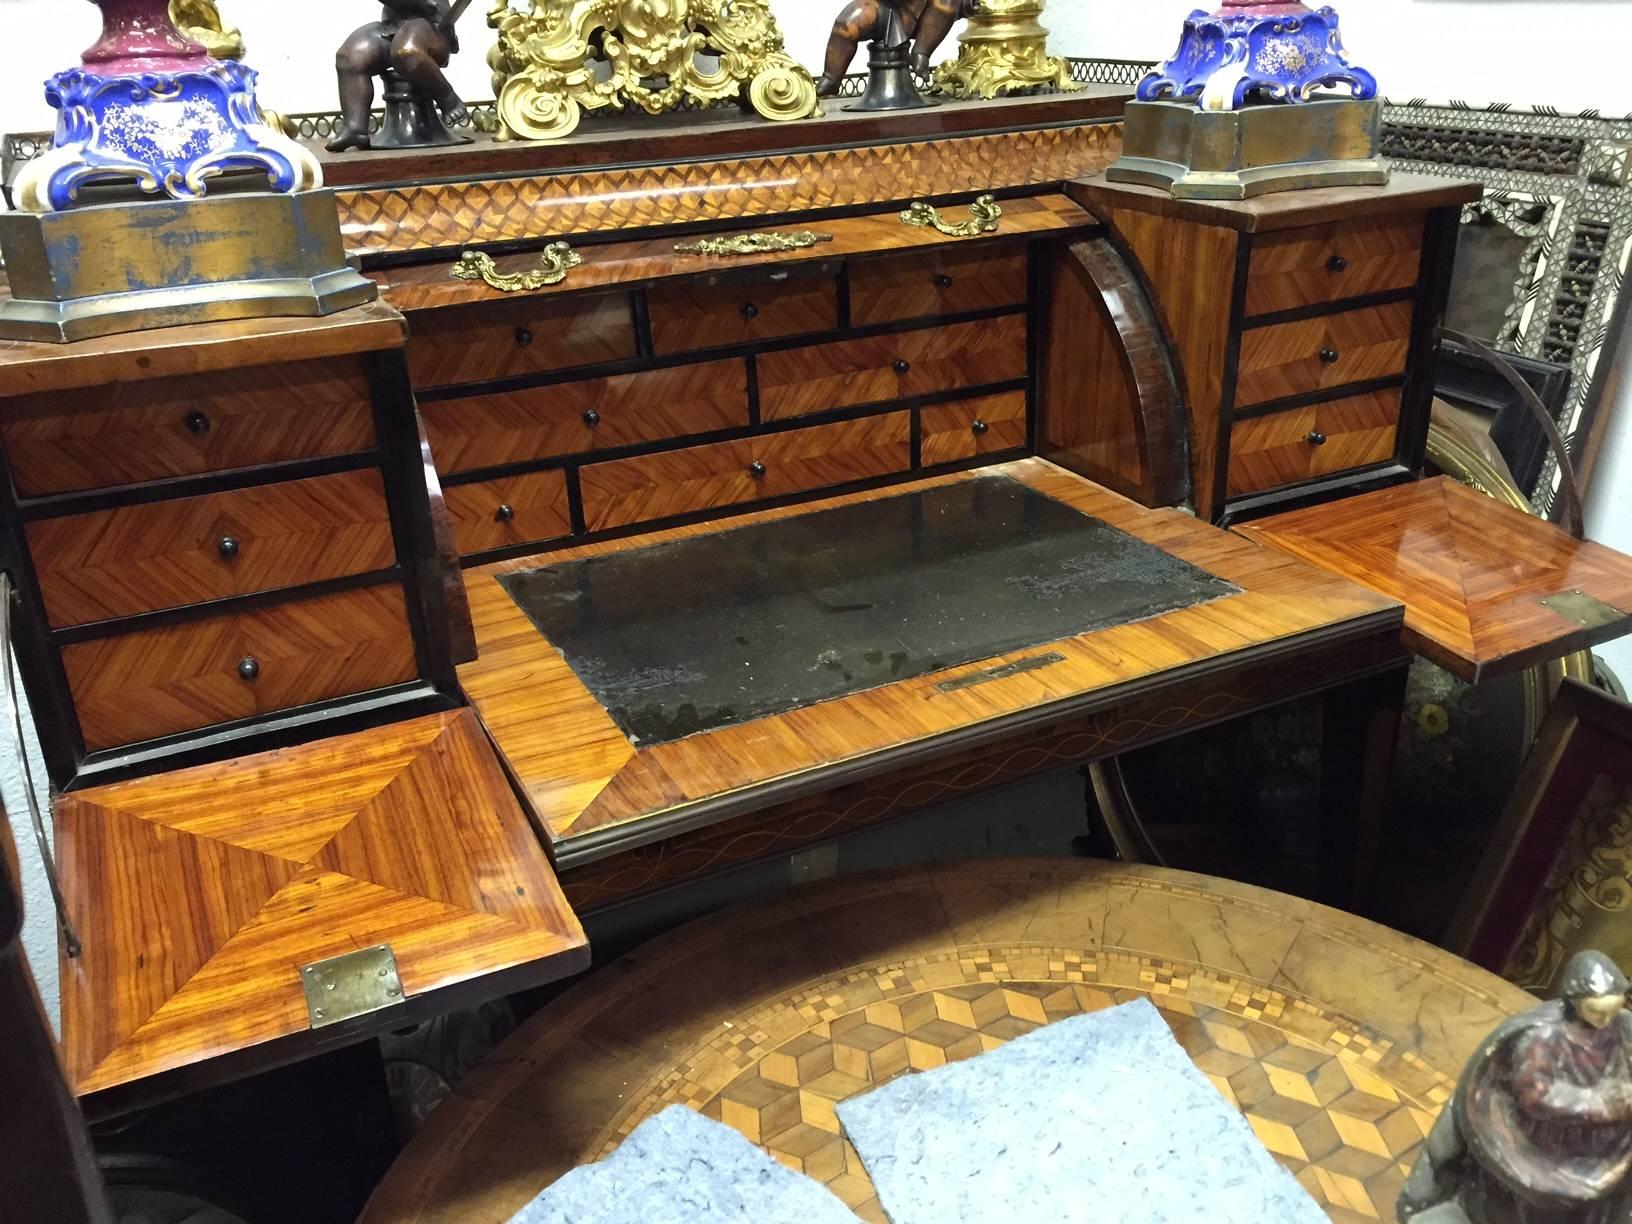 18th Century and Earlier 18th Century Italian Inlaid Desk with Fine Marquetry and Parquetry